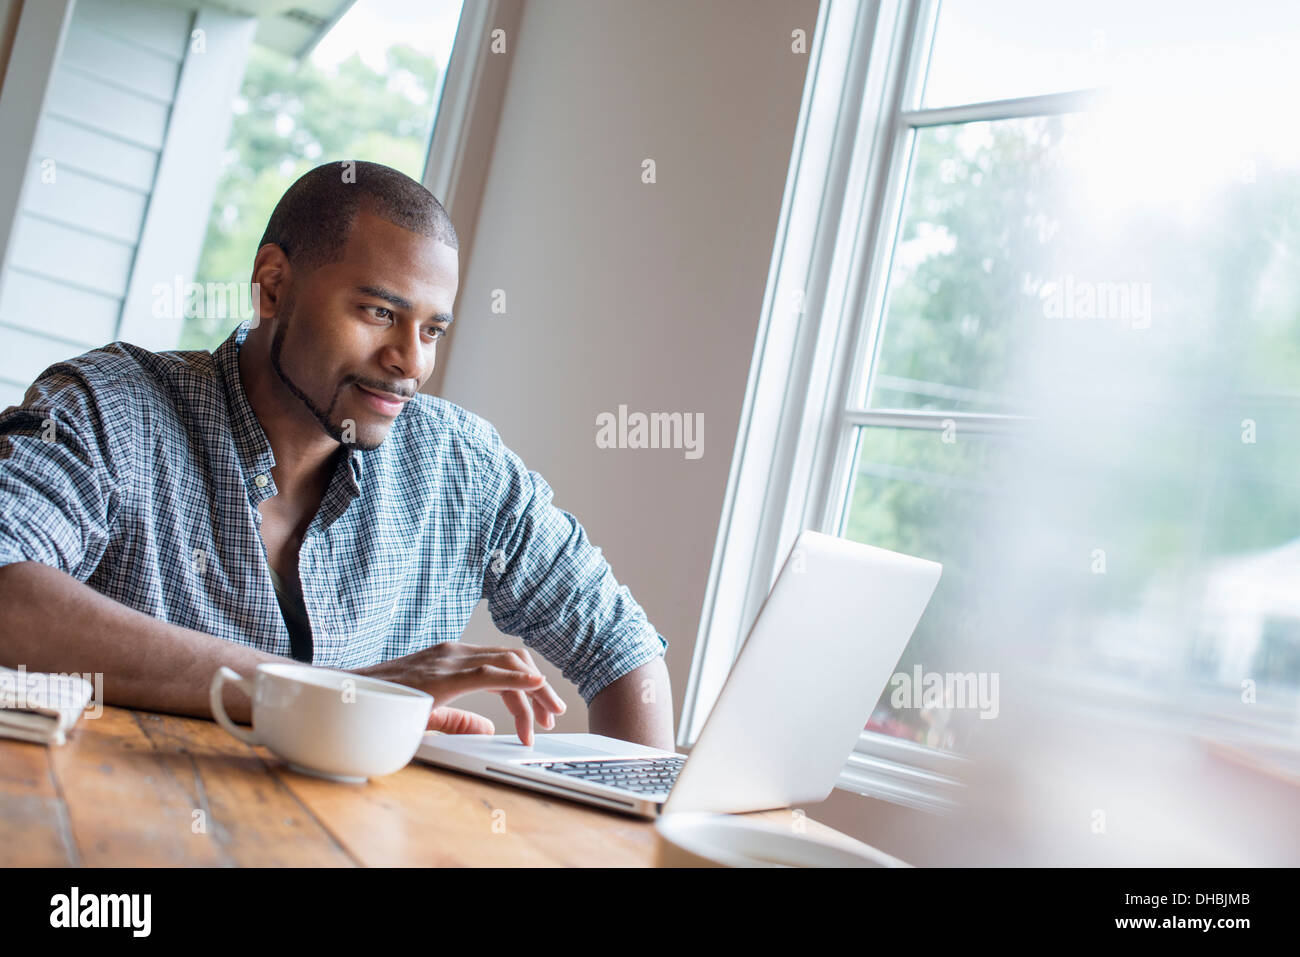 A man sitting in a cafe with a cup of coffee, using a laptop computer. Stock Photo